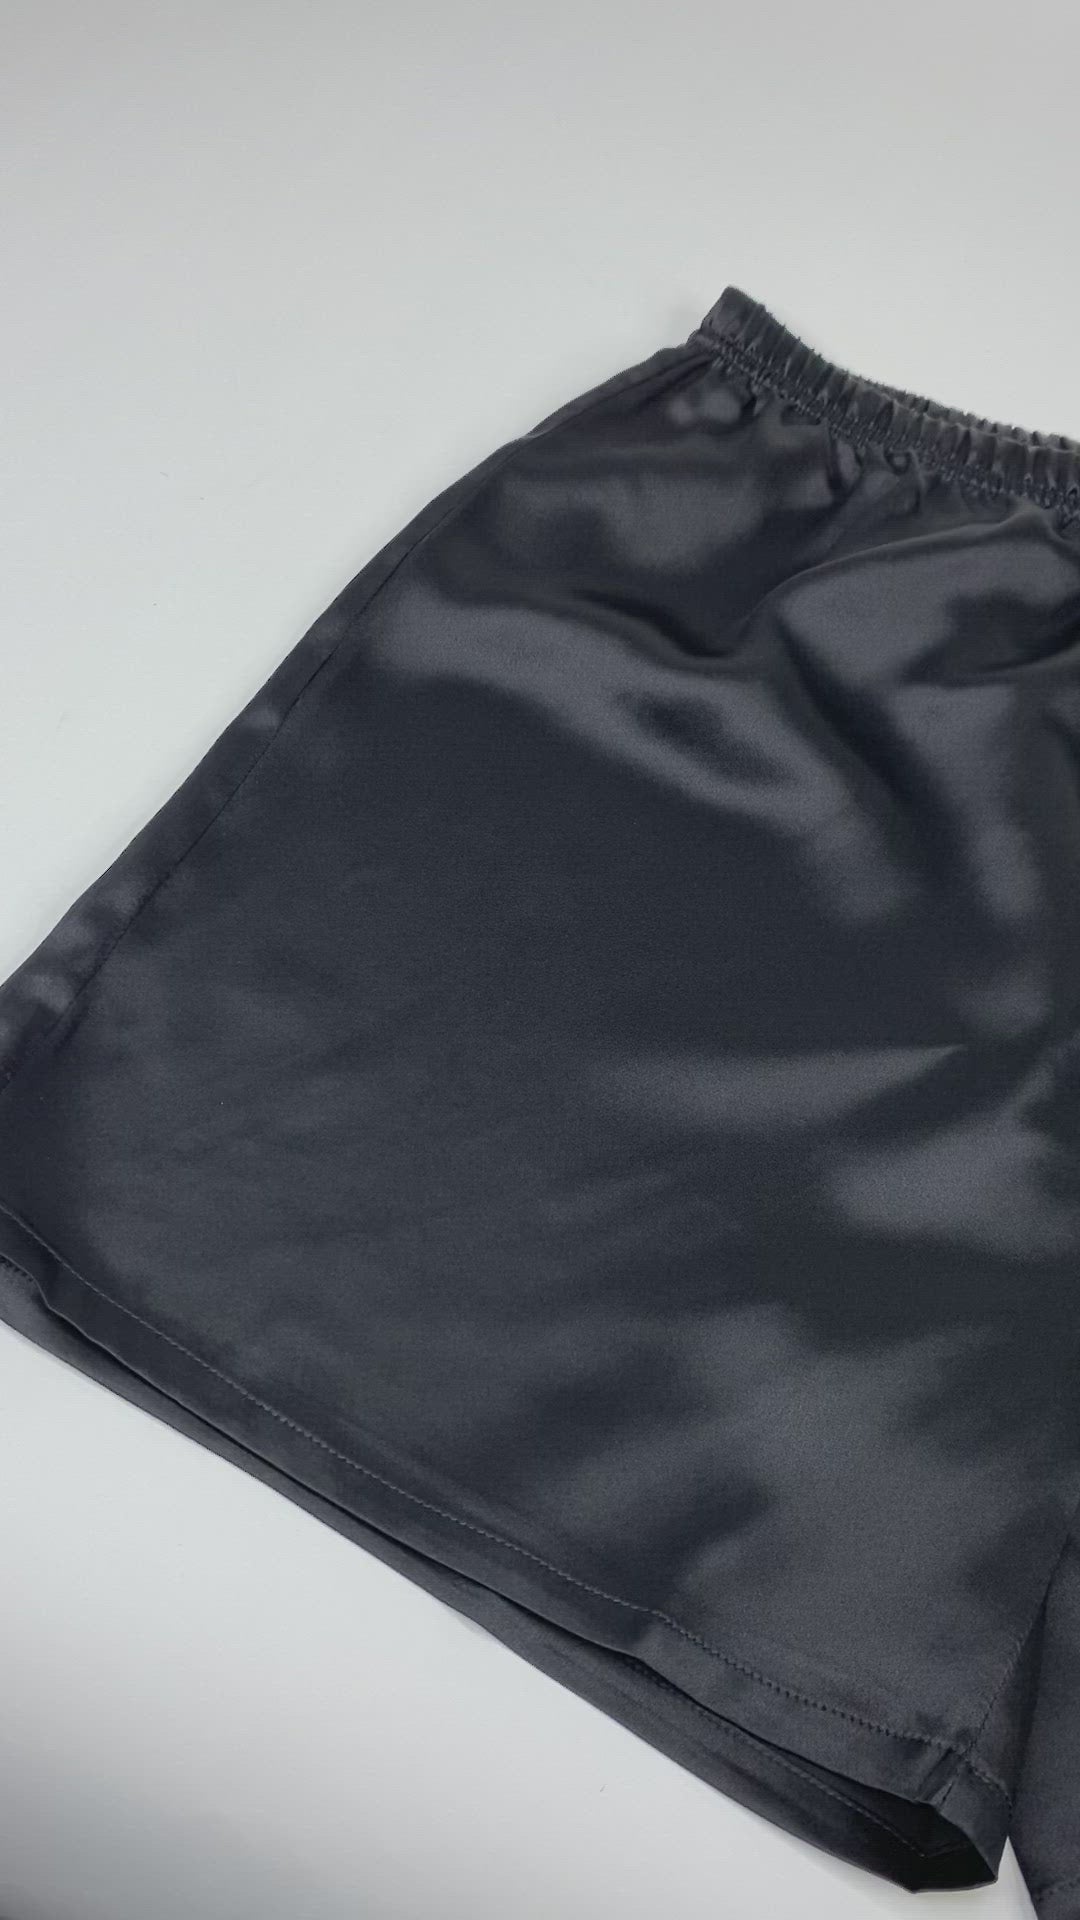 Liam Pure Silk Shorts in Black. Made from pure 100% mulberry silk with elastic waistband. Easy, Breezy and comfortable. 